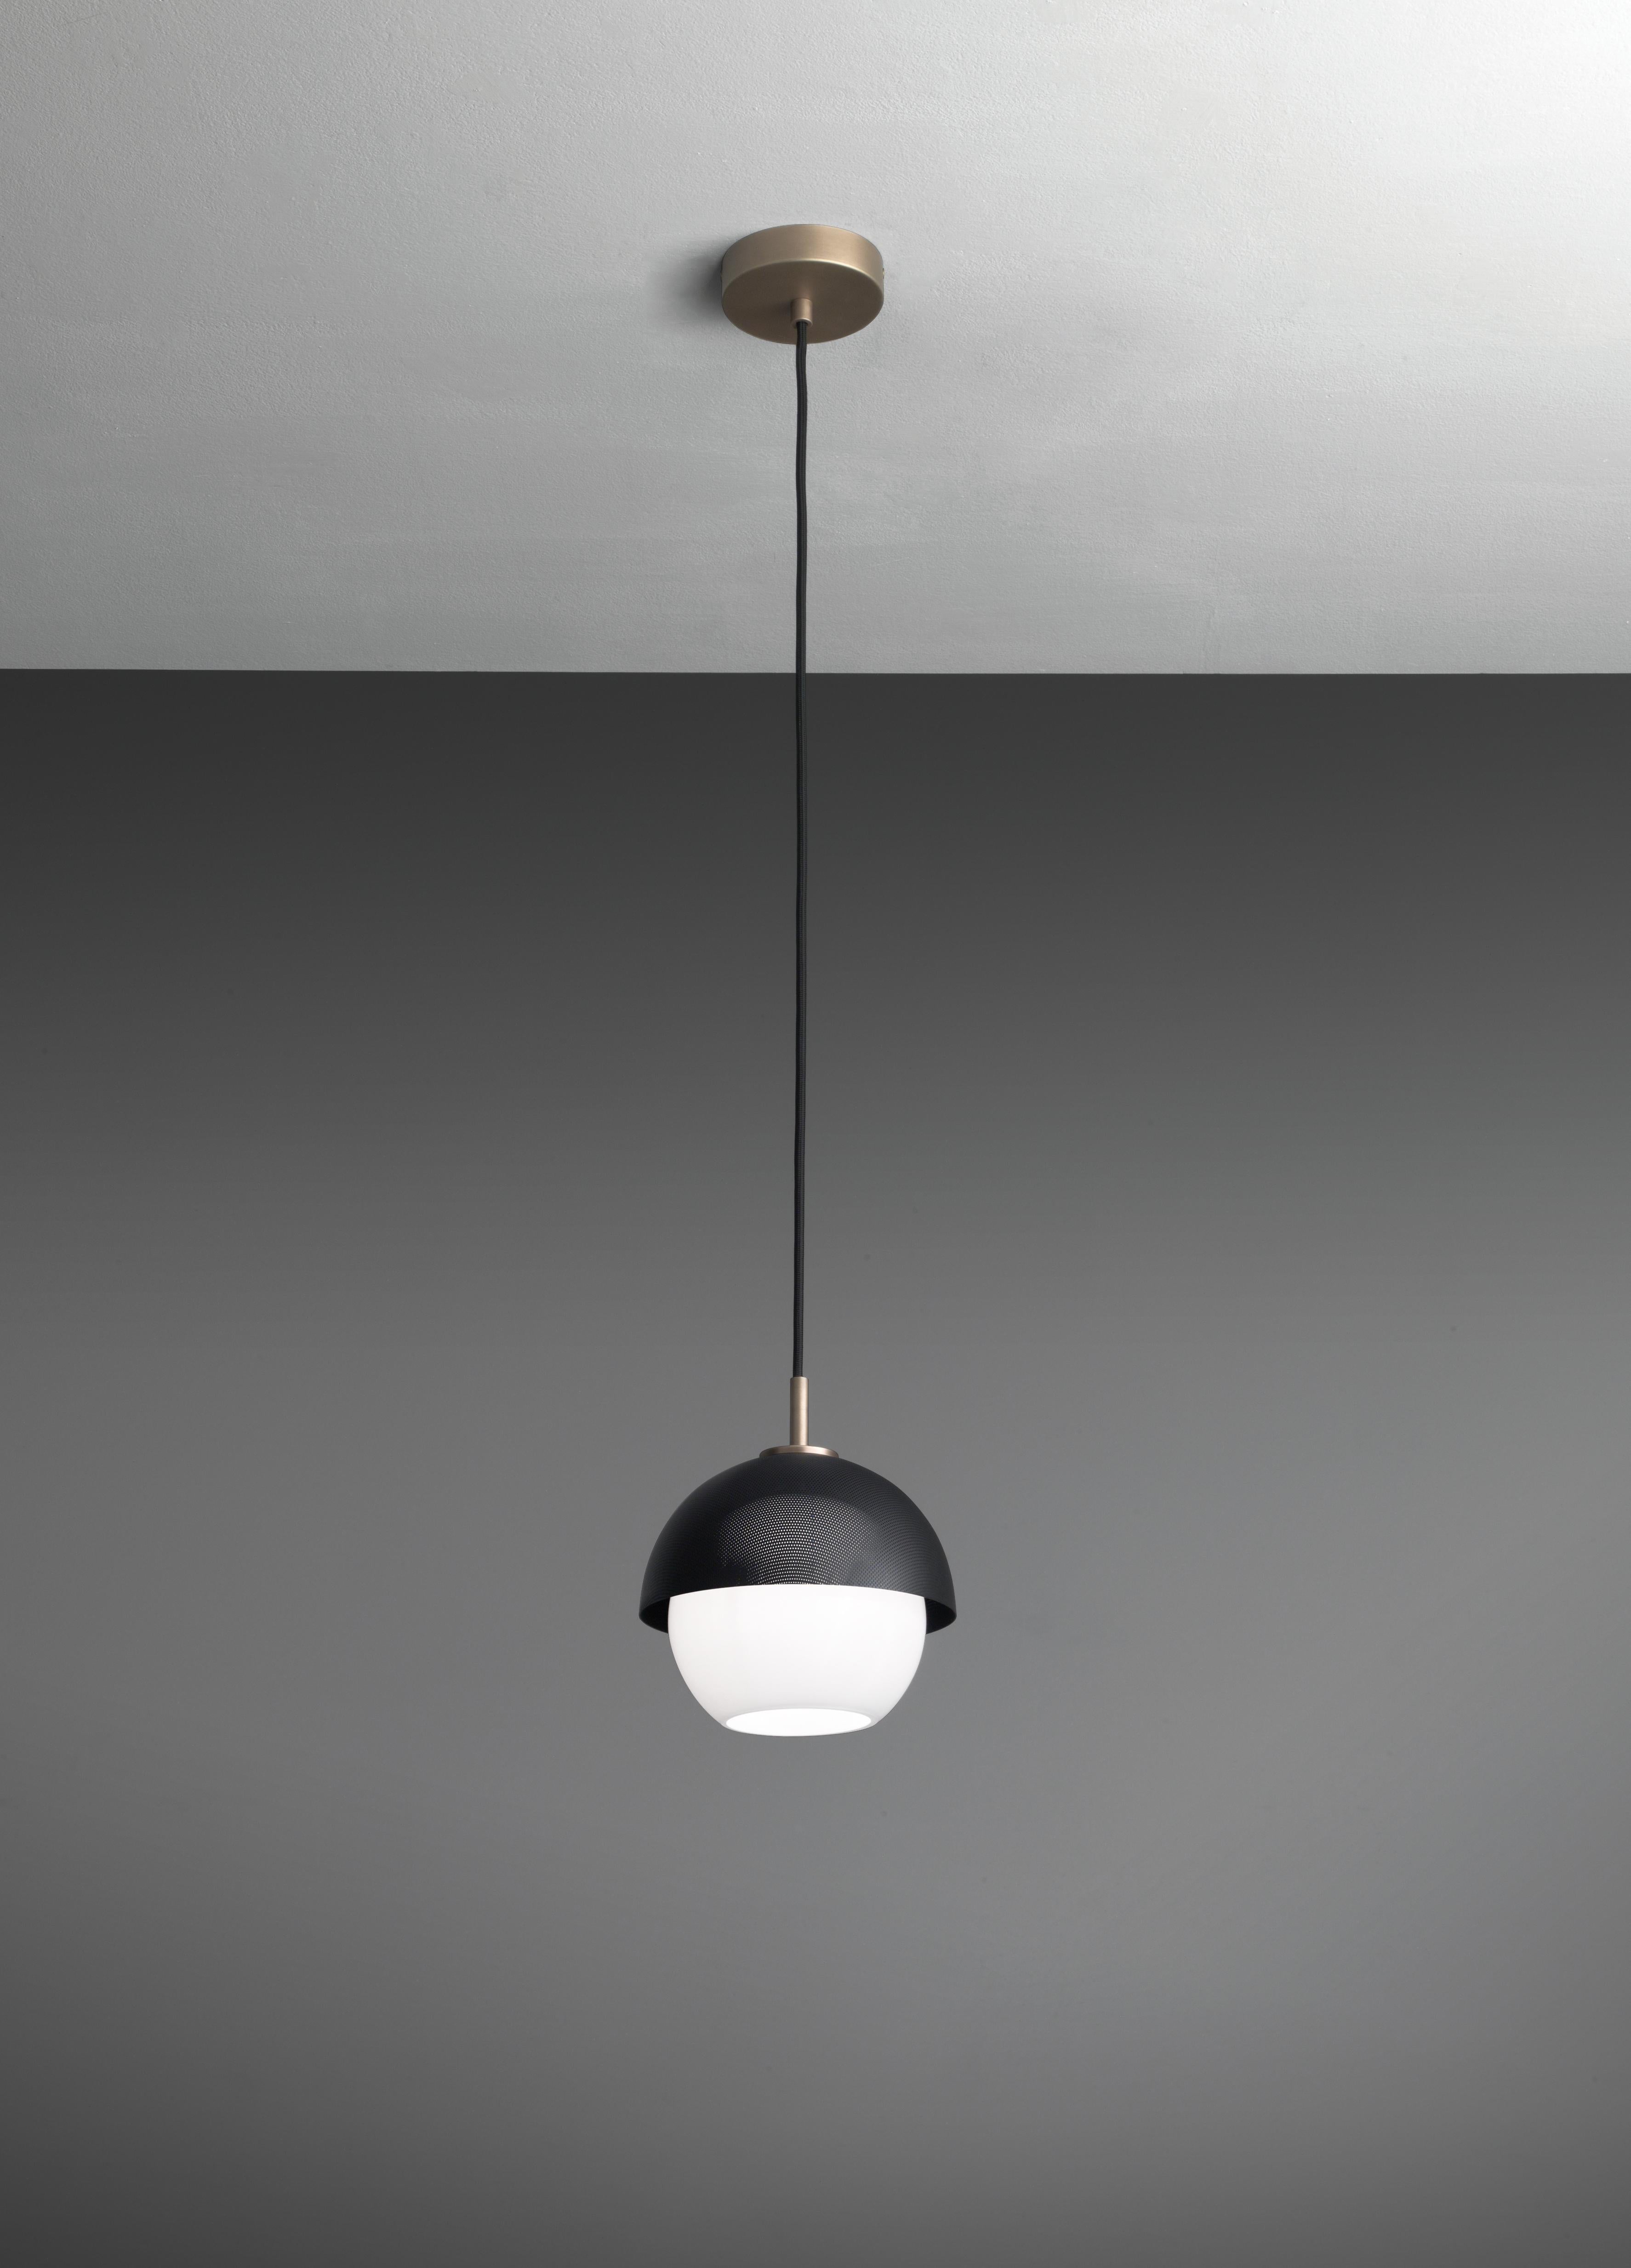 Suspended lamp with diffused light. Light burnished brass structure with matte gold or matte black perforated metal lampshade. White Murano blown glass diffuser.
Specifications:
Function: Suspension
Location: Interior
Light emission: Diffused